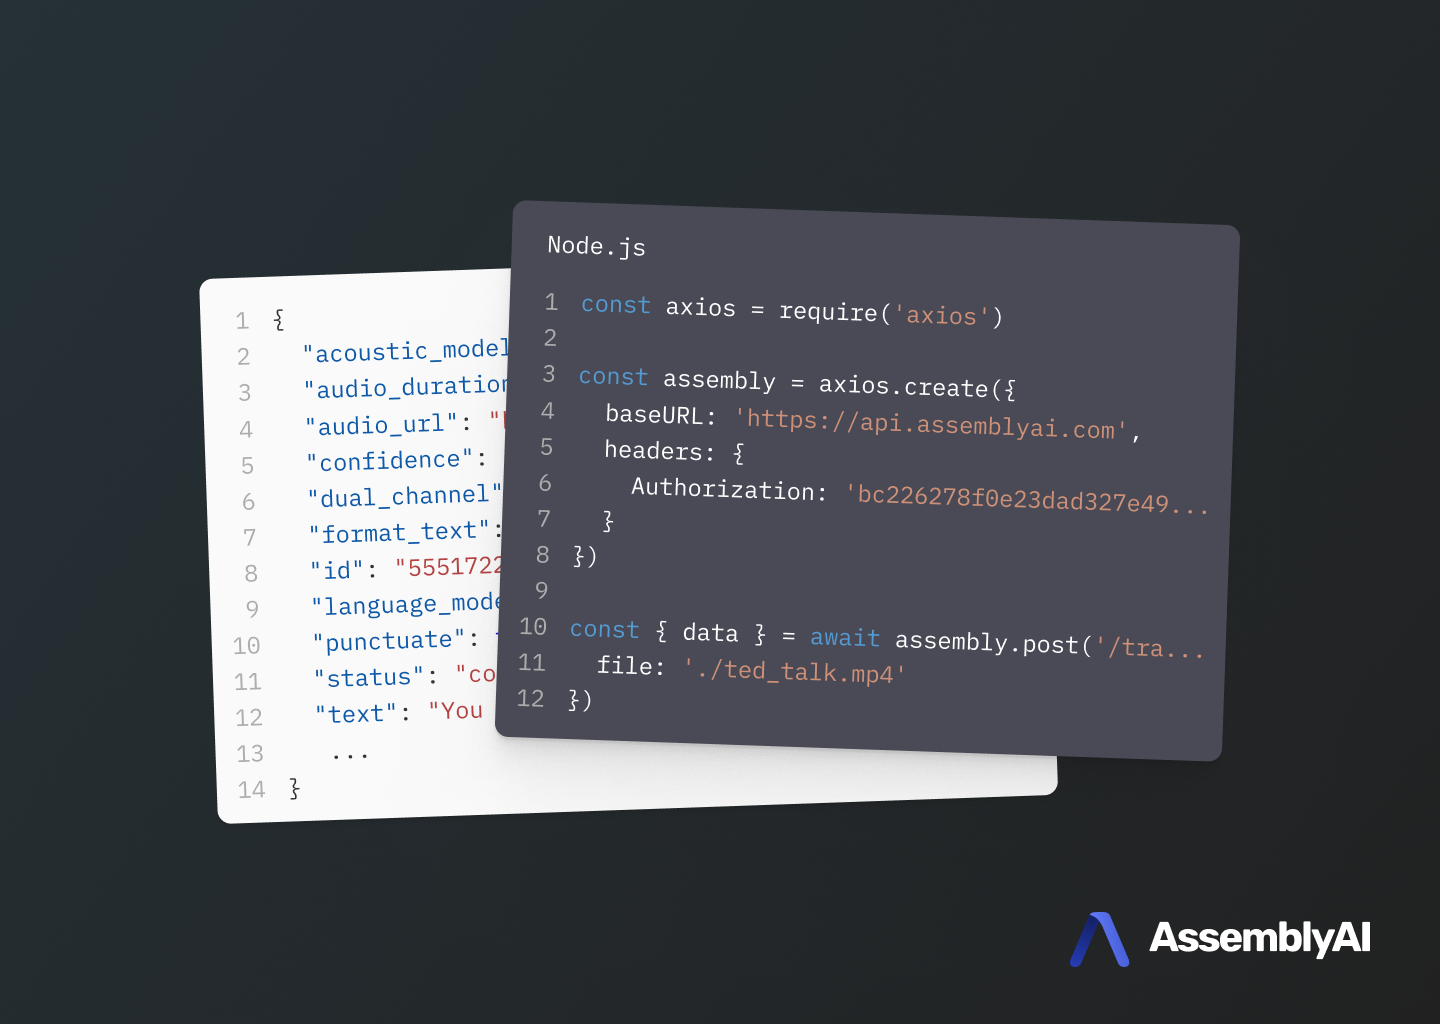 Examples of code being used to call Assembly AI's API.